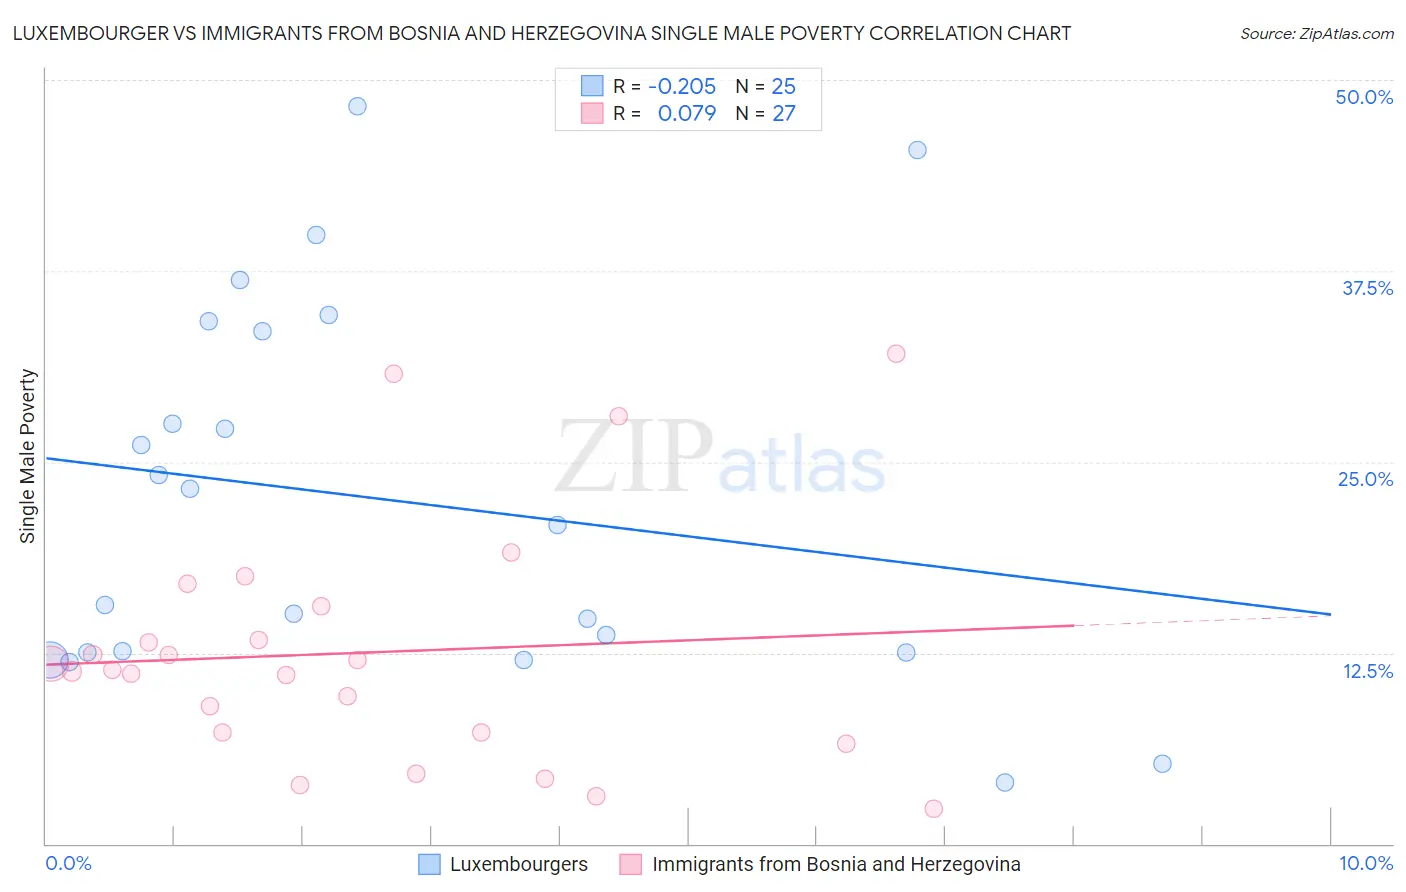 Luxembourger vs Immigrants from Bosnia and Herzegovina Single Male Poverty